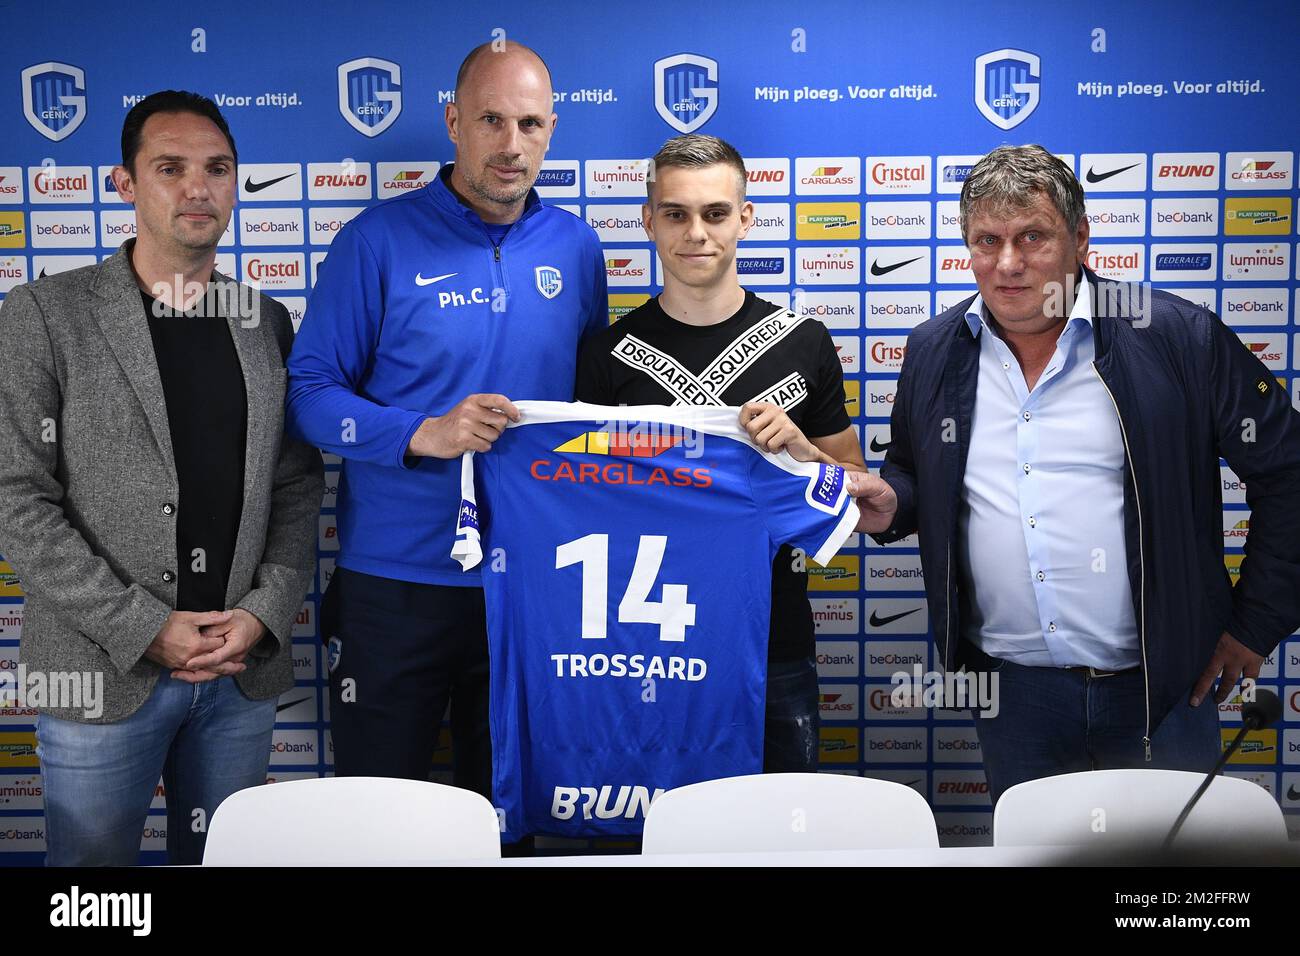 Genk's technical director Dimitri De Conde, Genk's head coach Philippe Clement, Genk's Leandro Trossard and Trossard's manager Josy Comhair pictured during a press conference of Belgian first league soccer team KRC Genk, Thursday 24 May 2018 in Genk. BELGA PHOTO YORICK JANSENS Stock Photo